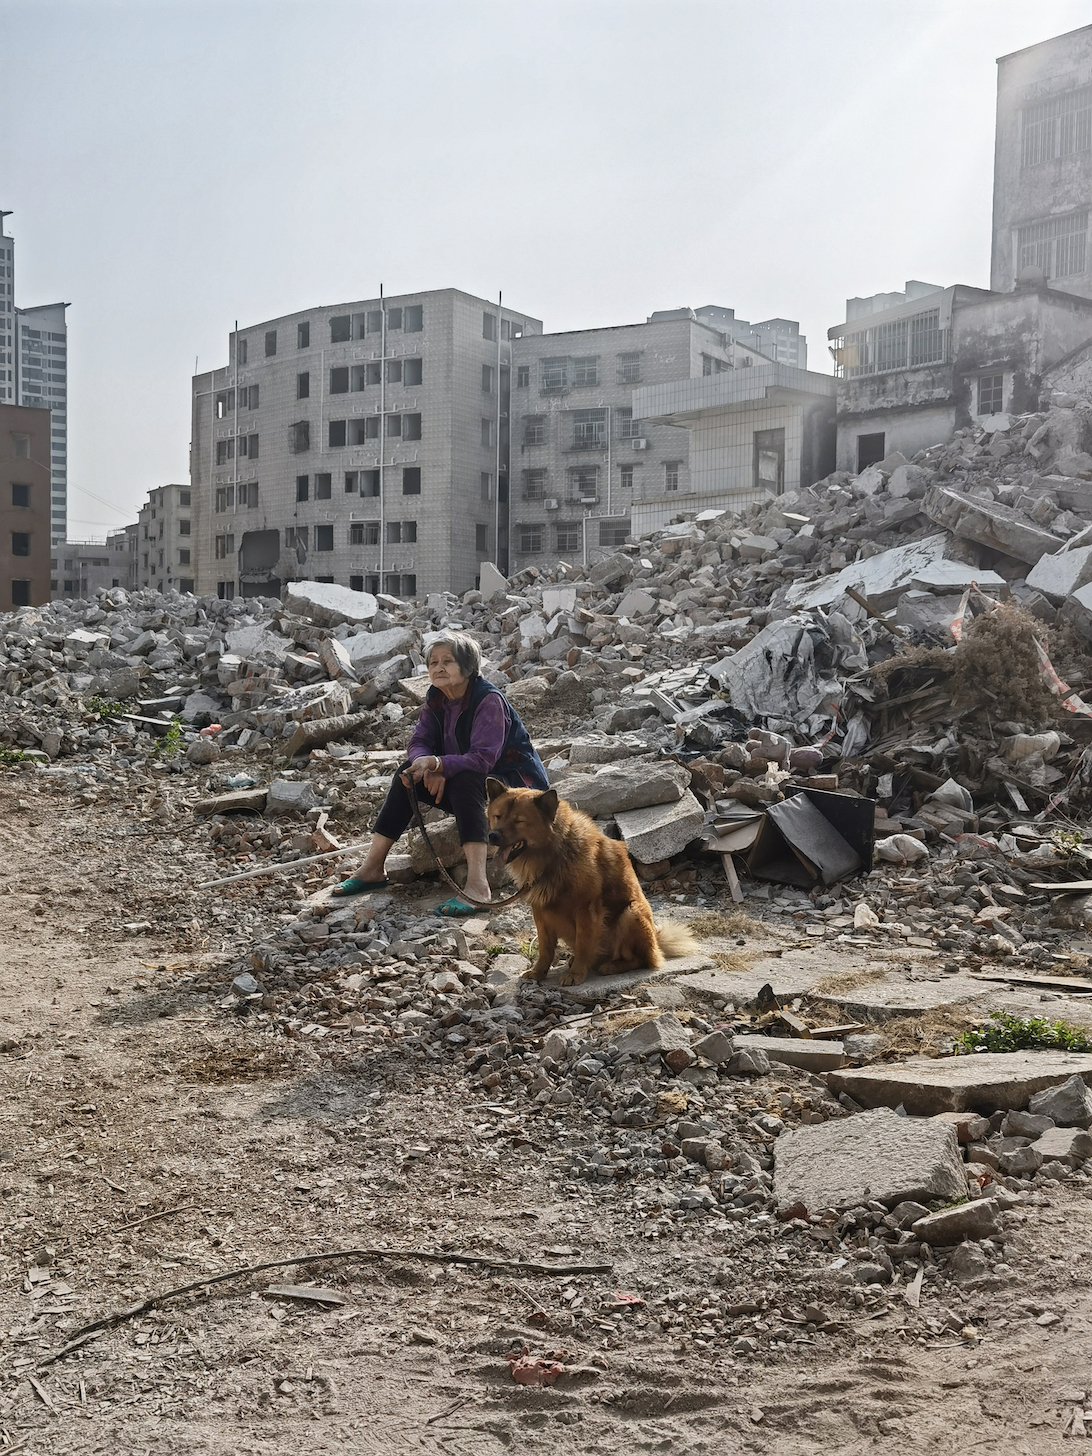 An elderly Chinese woman sits amongst rubble with her dog, looking pensive